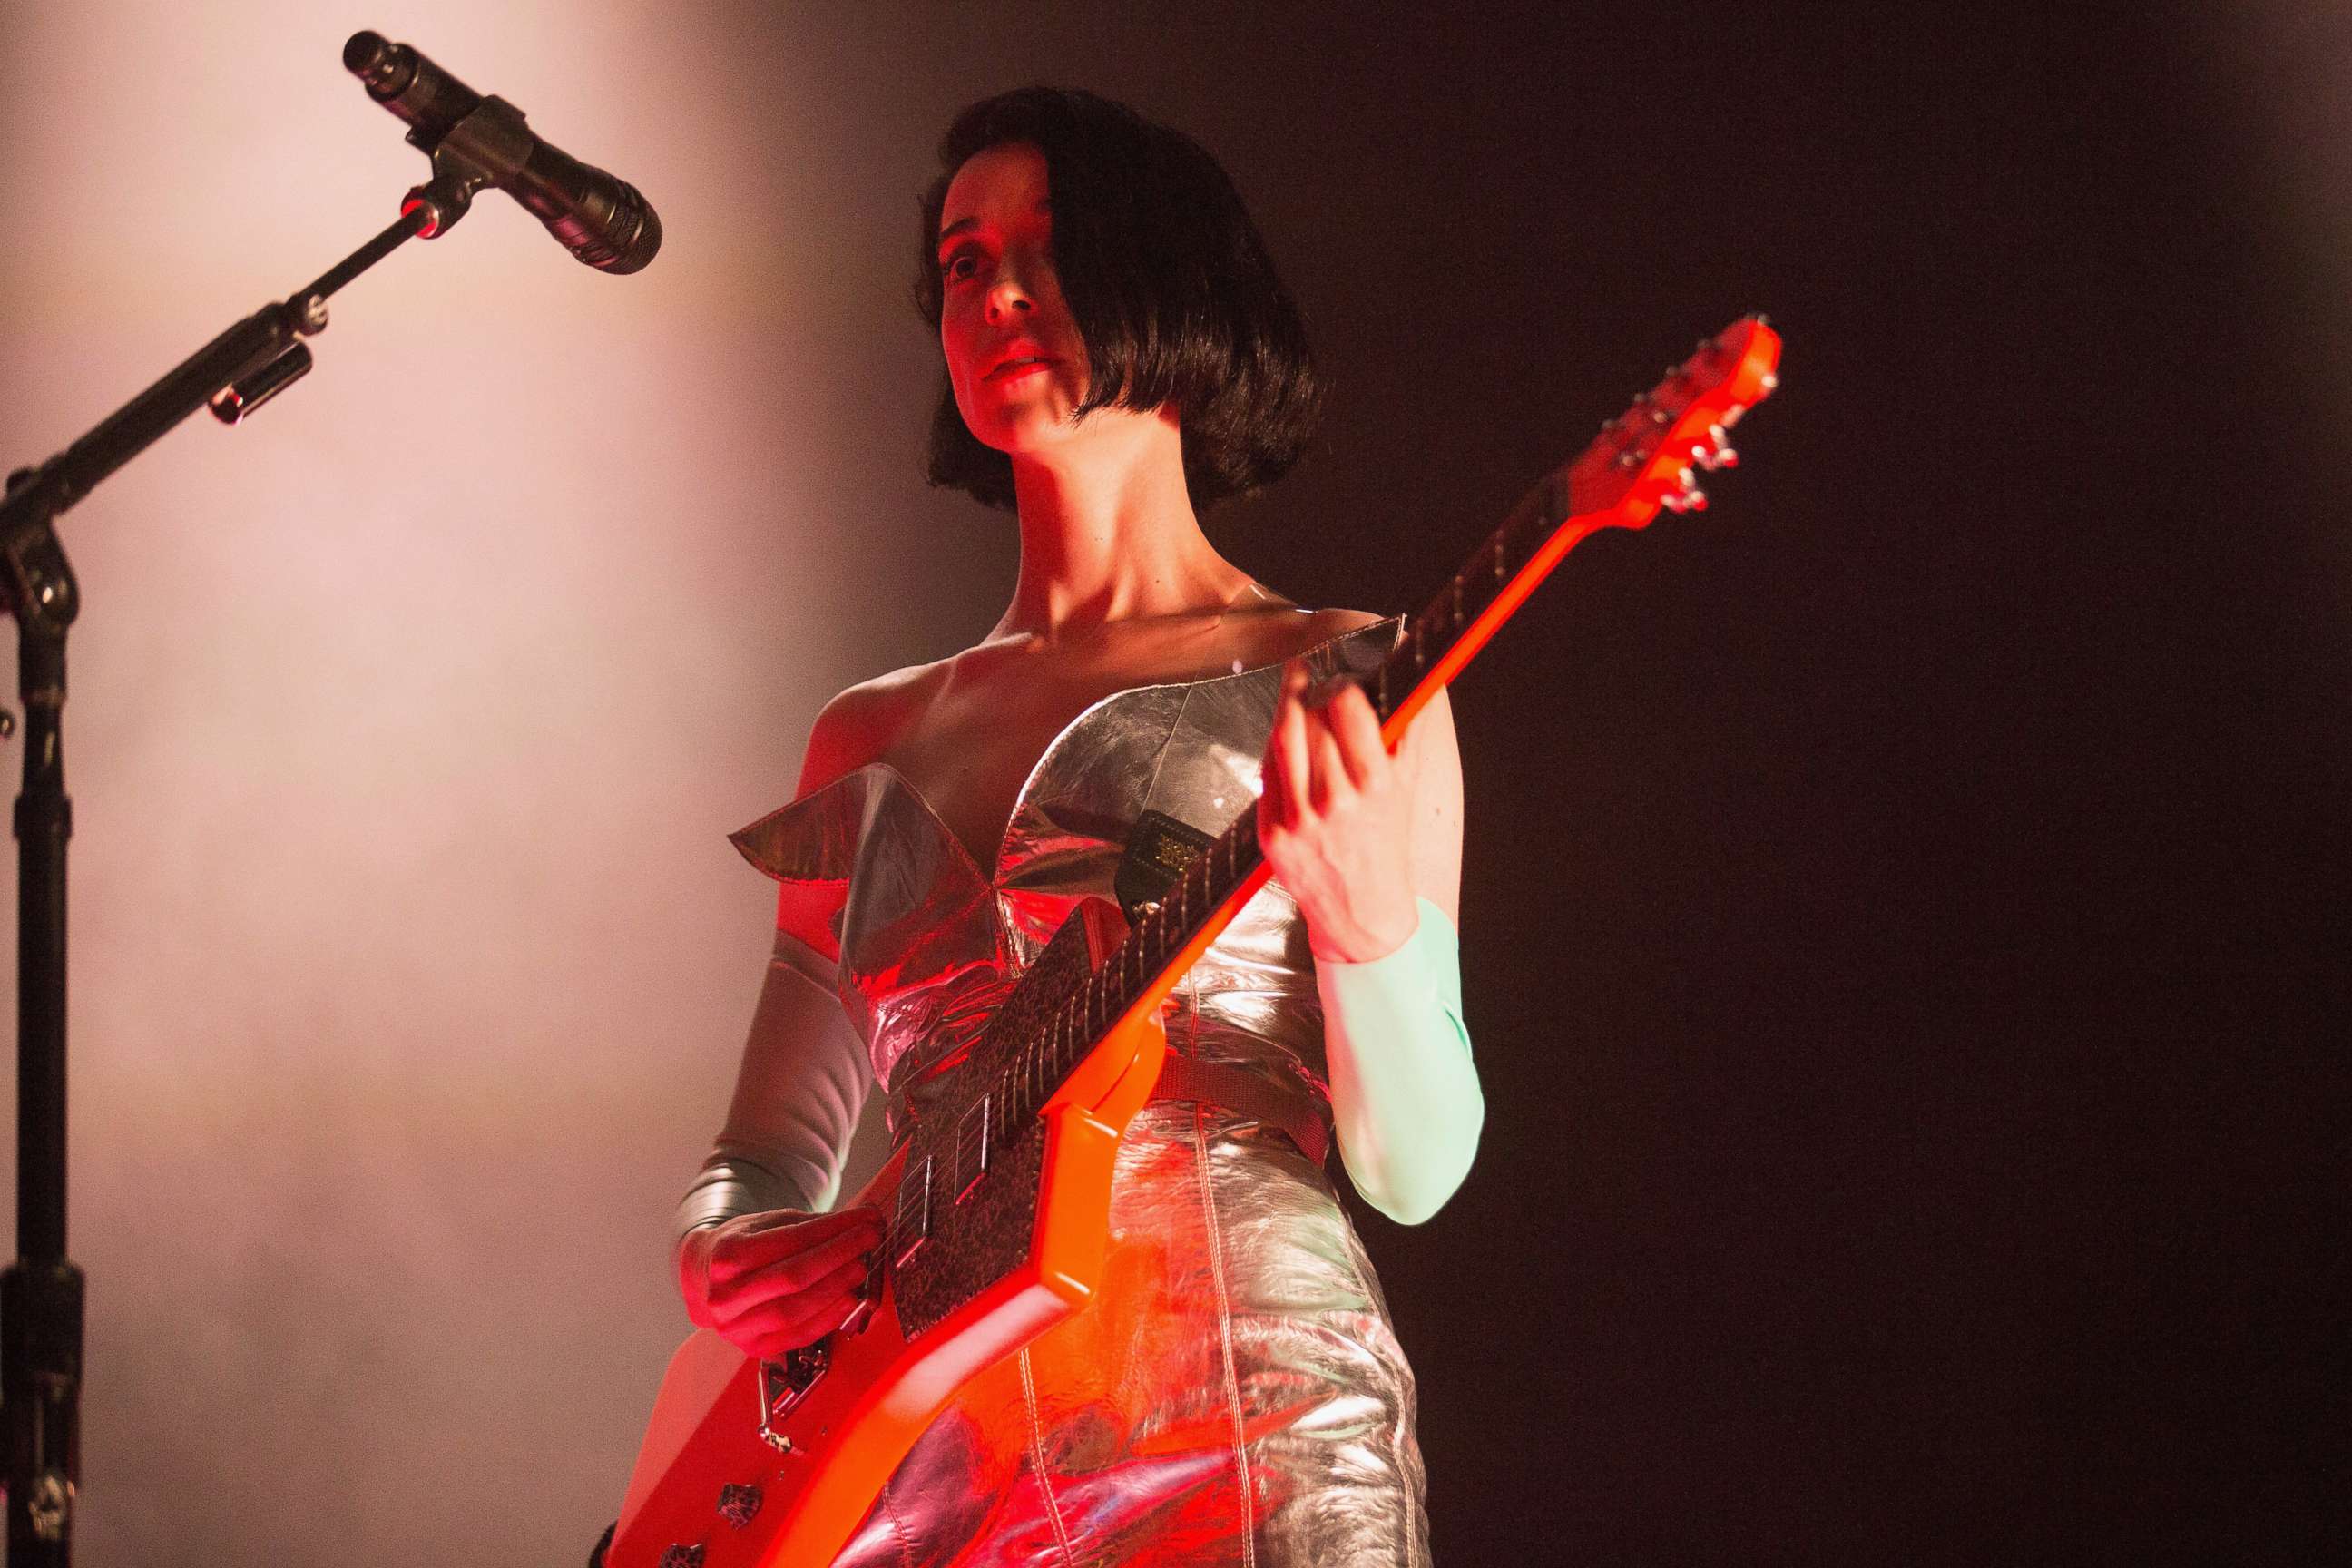 PHOTO: St. Vincent performs on stage during opening night of the "Fear The Future" tour as part of the Red Bull Music Academy Festival Los Angeles at Paramount Studios, Oct. 7, 2017 in Hollywood, Calif.  